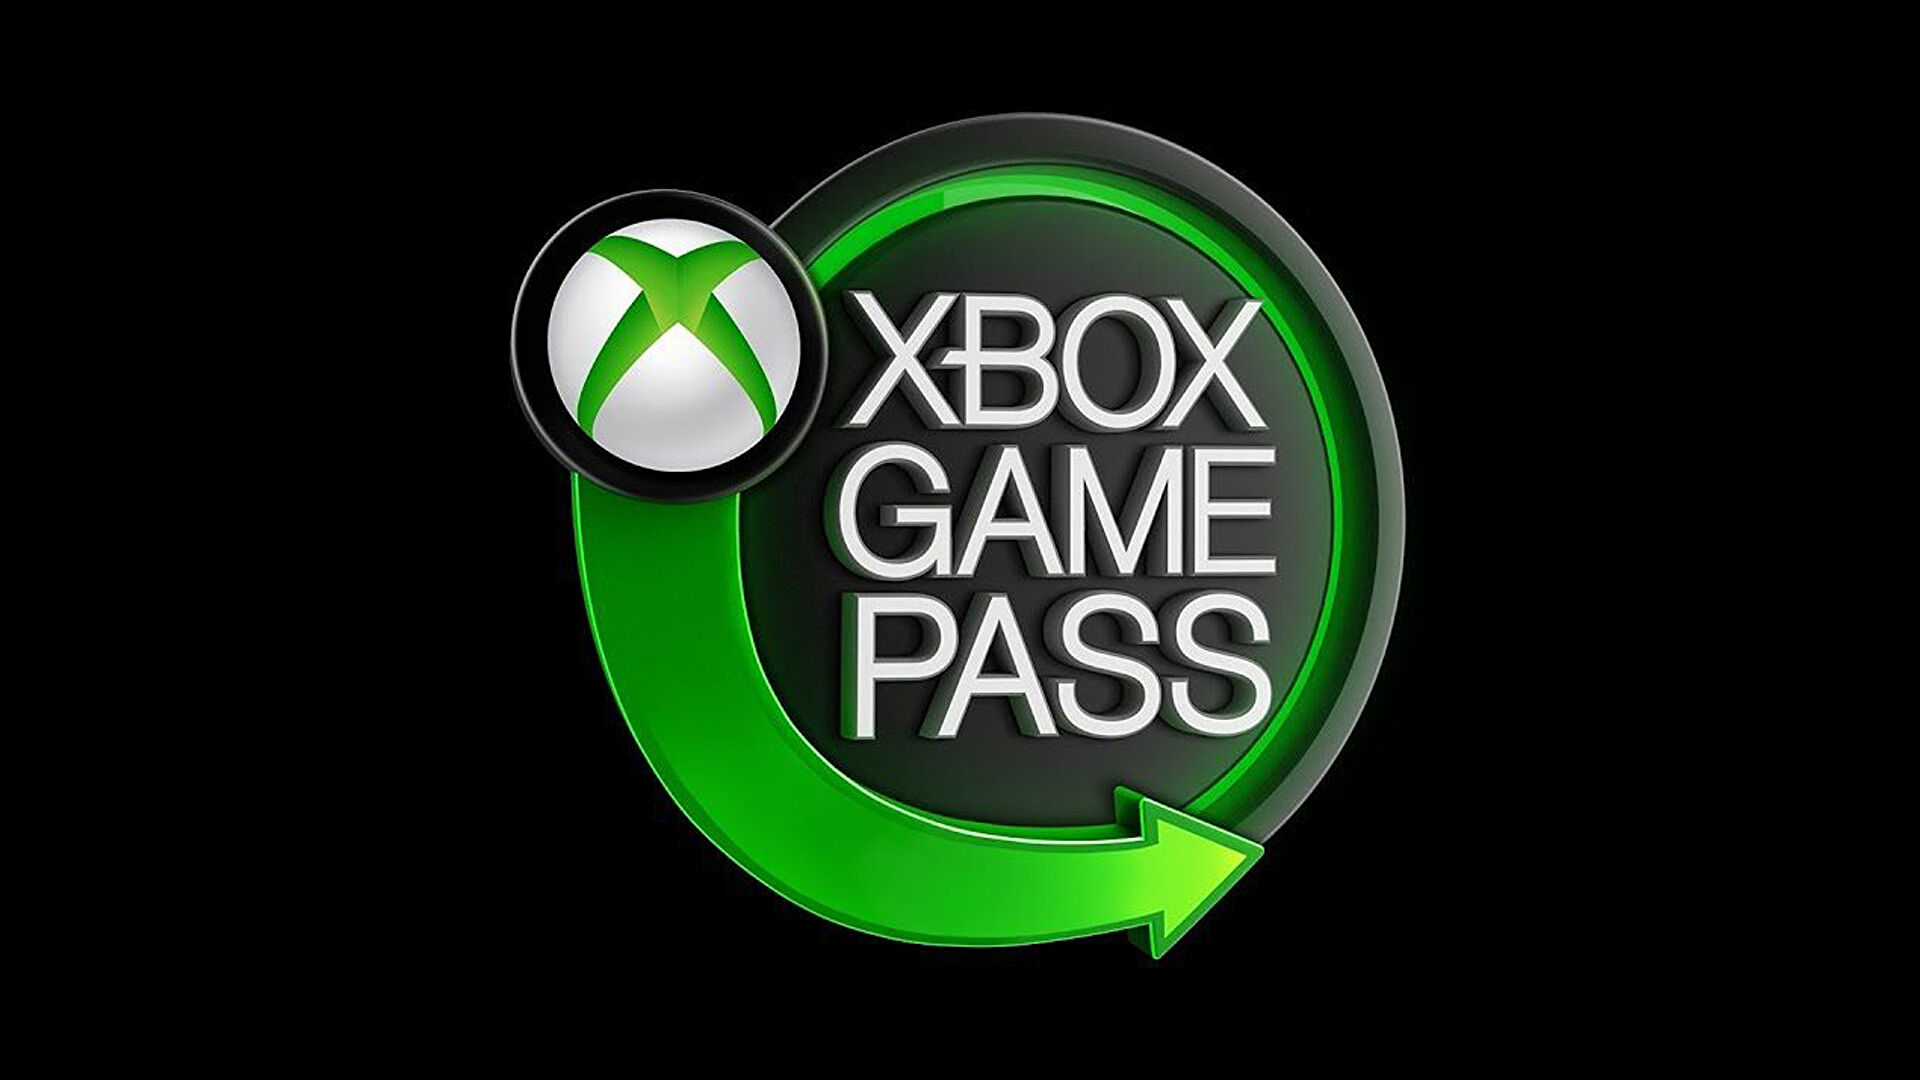 Leaked Xbox Game Pass branding suggests family plan can be shared with friends too